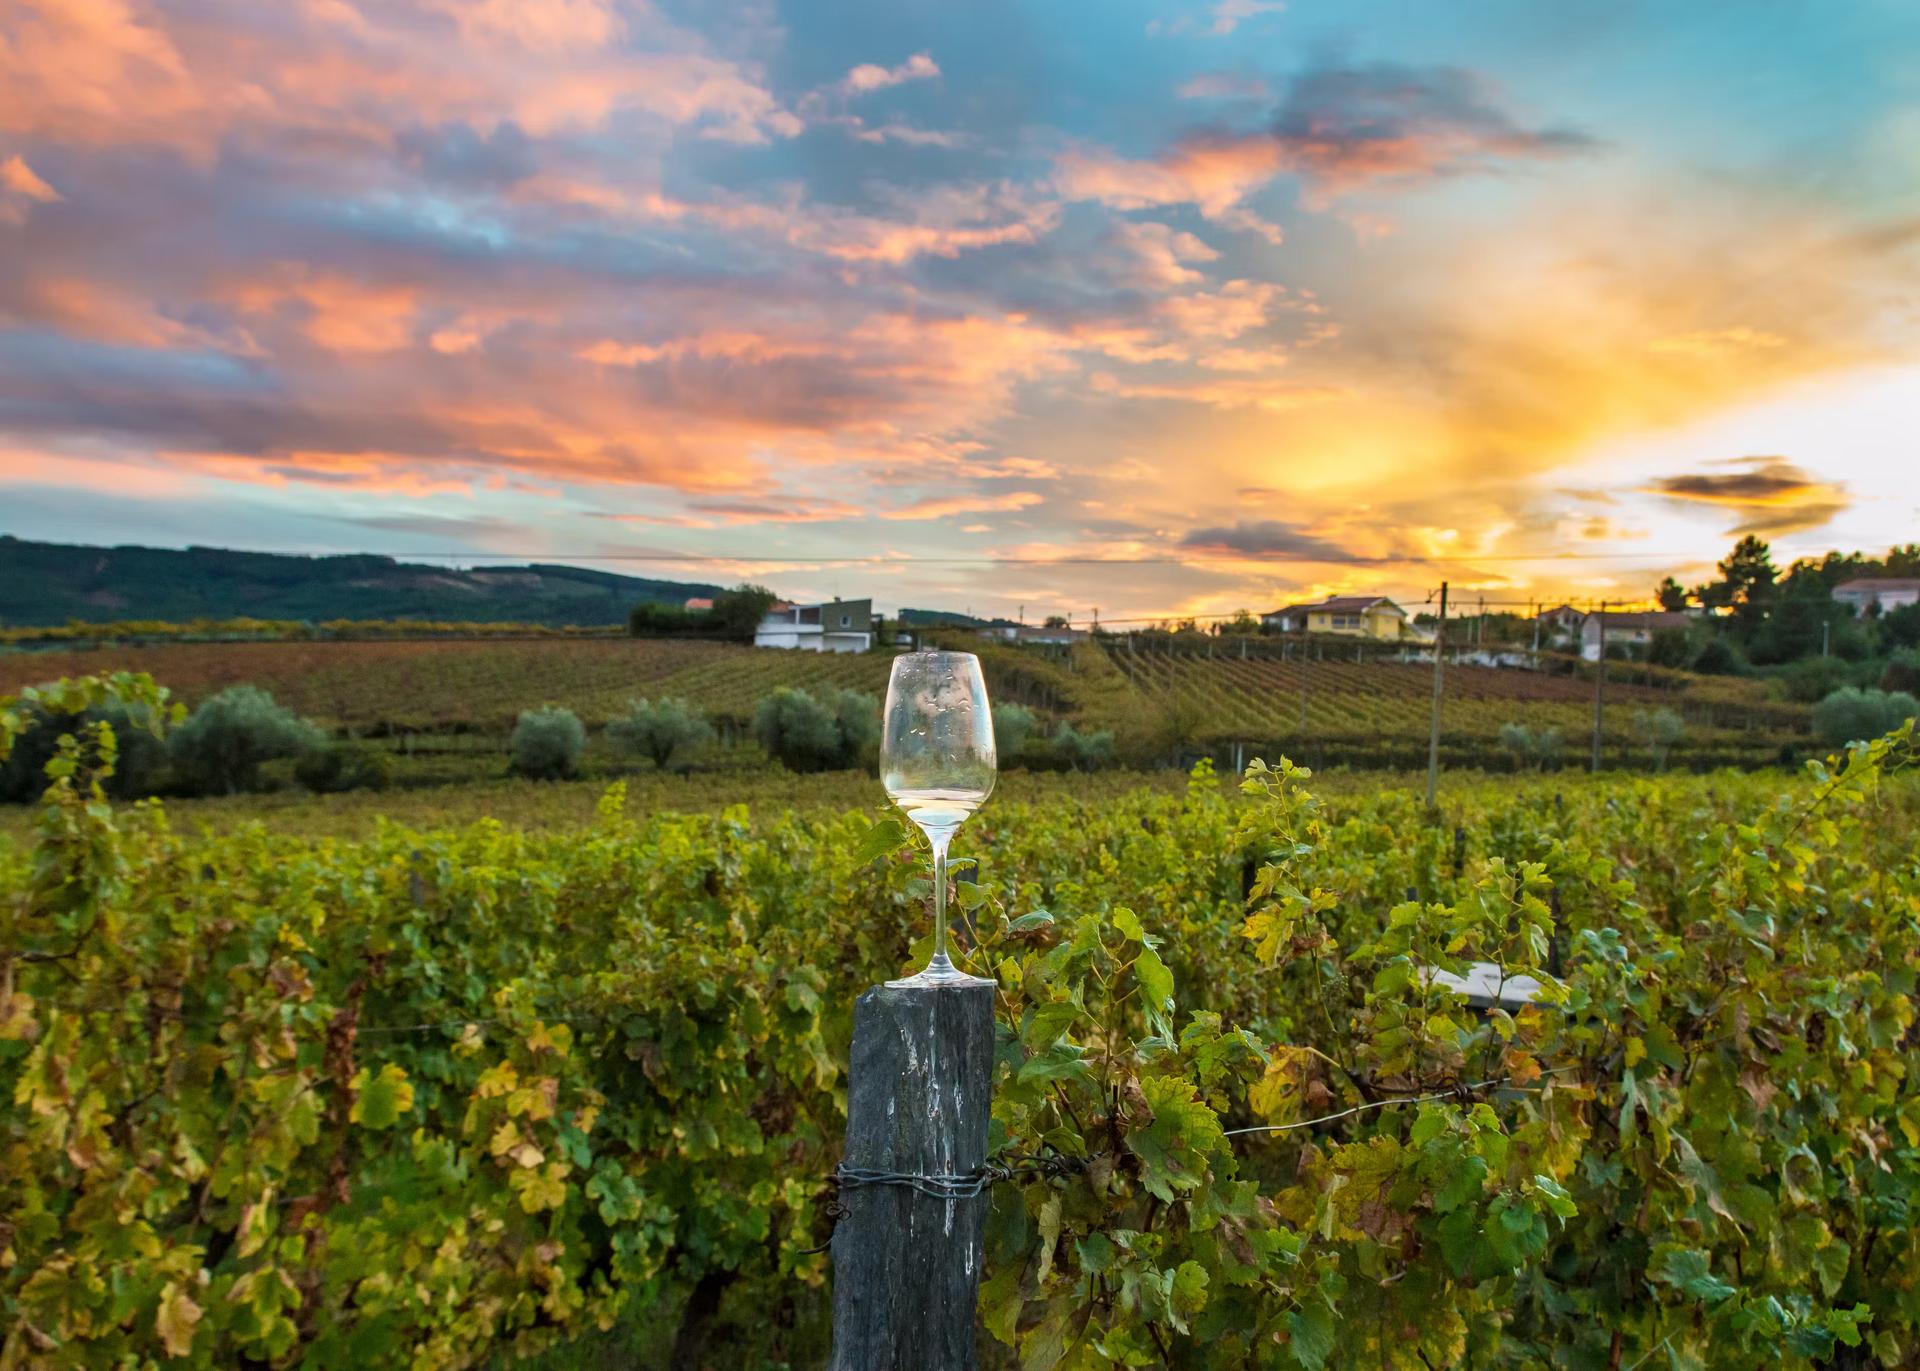 wineglass in a vineyard during a dramatic sunset with colorful clouds and beautiful colorful grape vines.